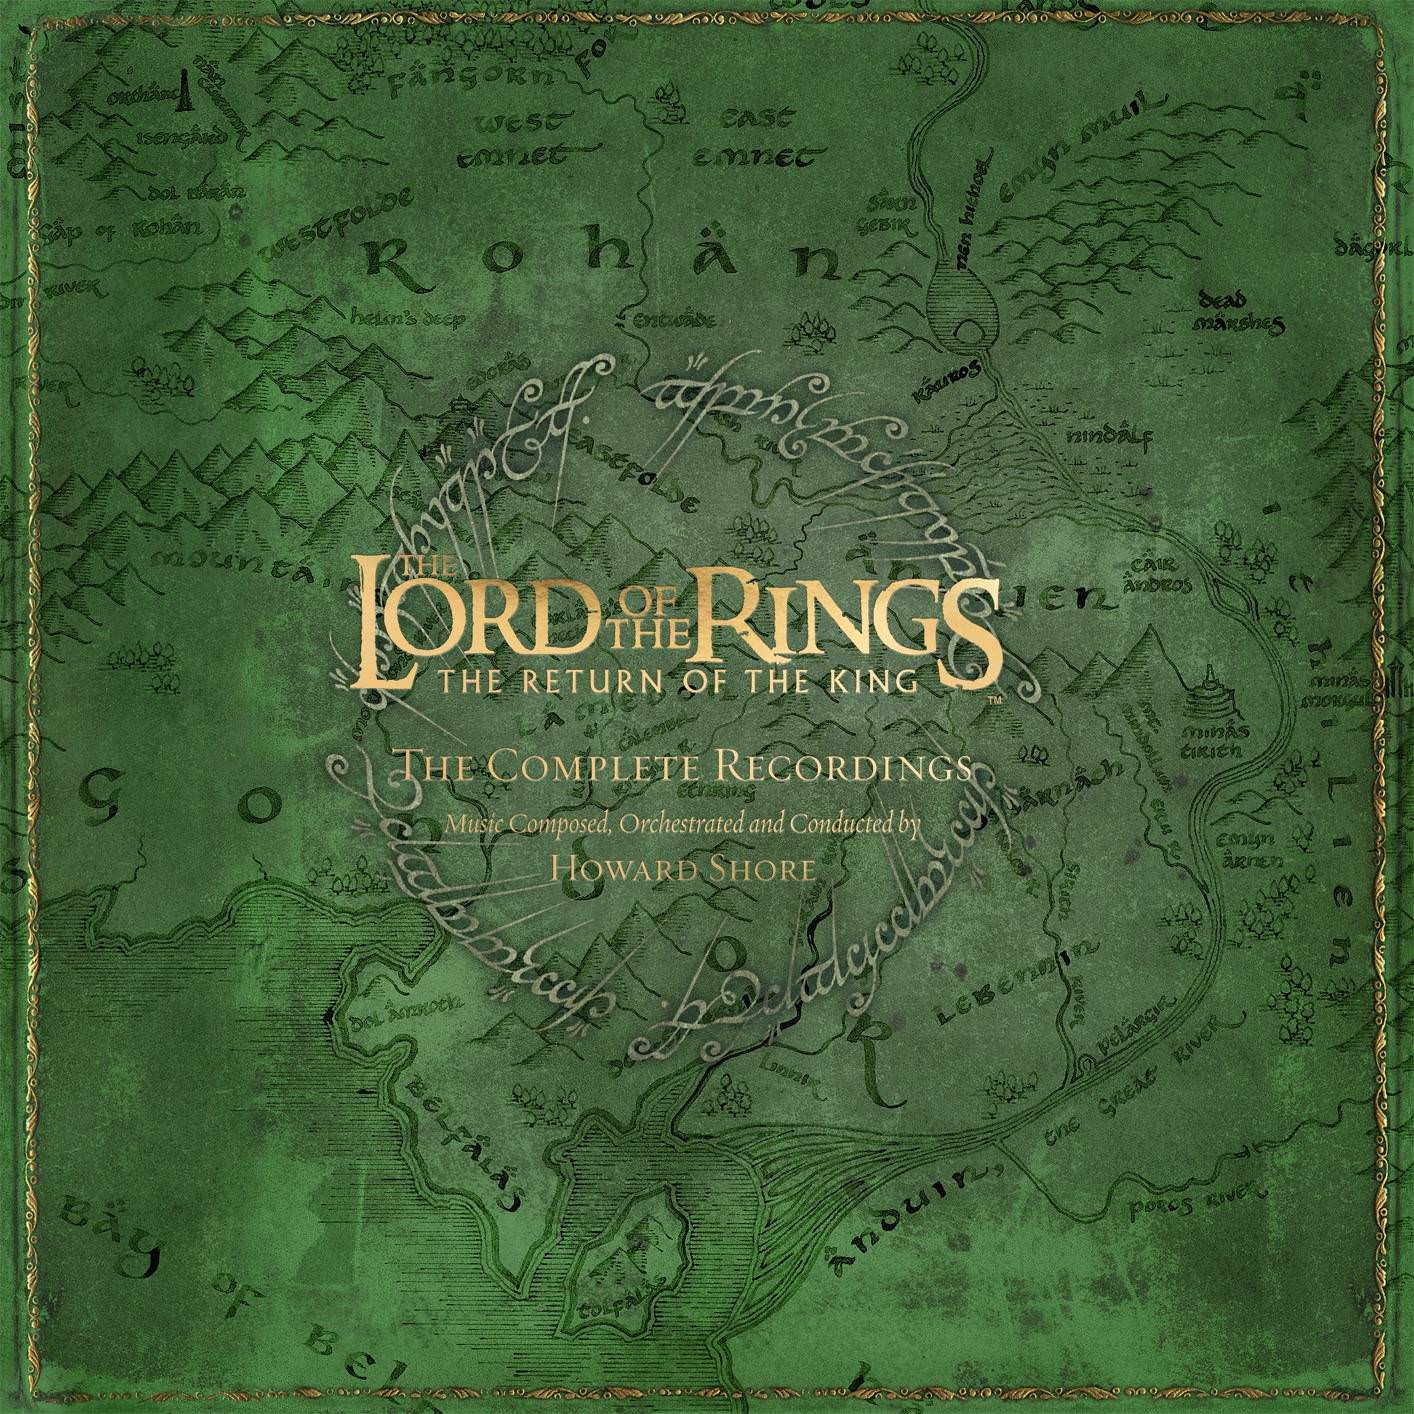 howardshore-the-lord-of-the-rings-the-return-of-the-king-the